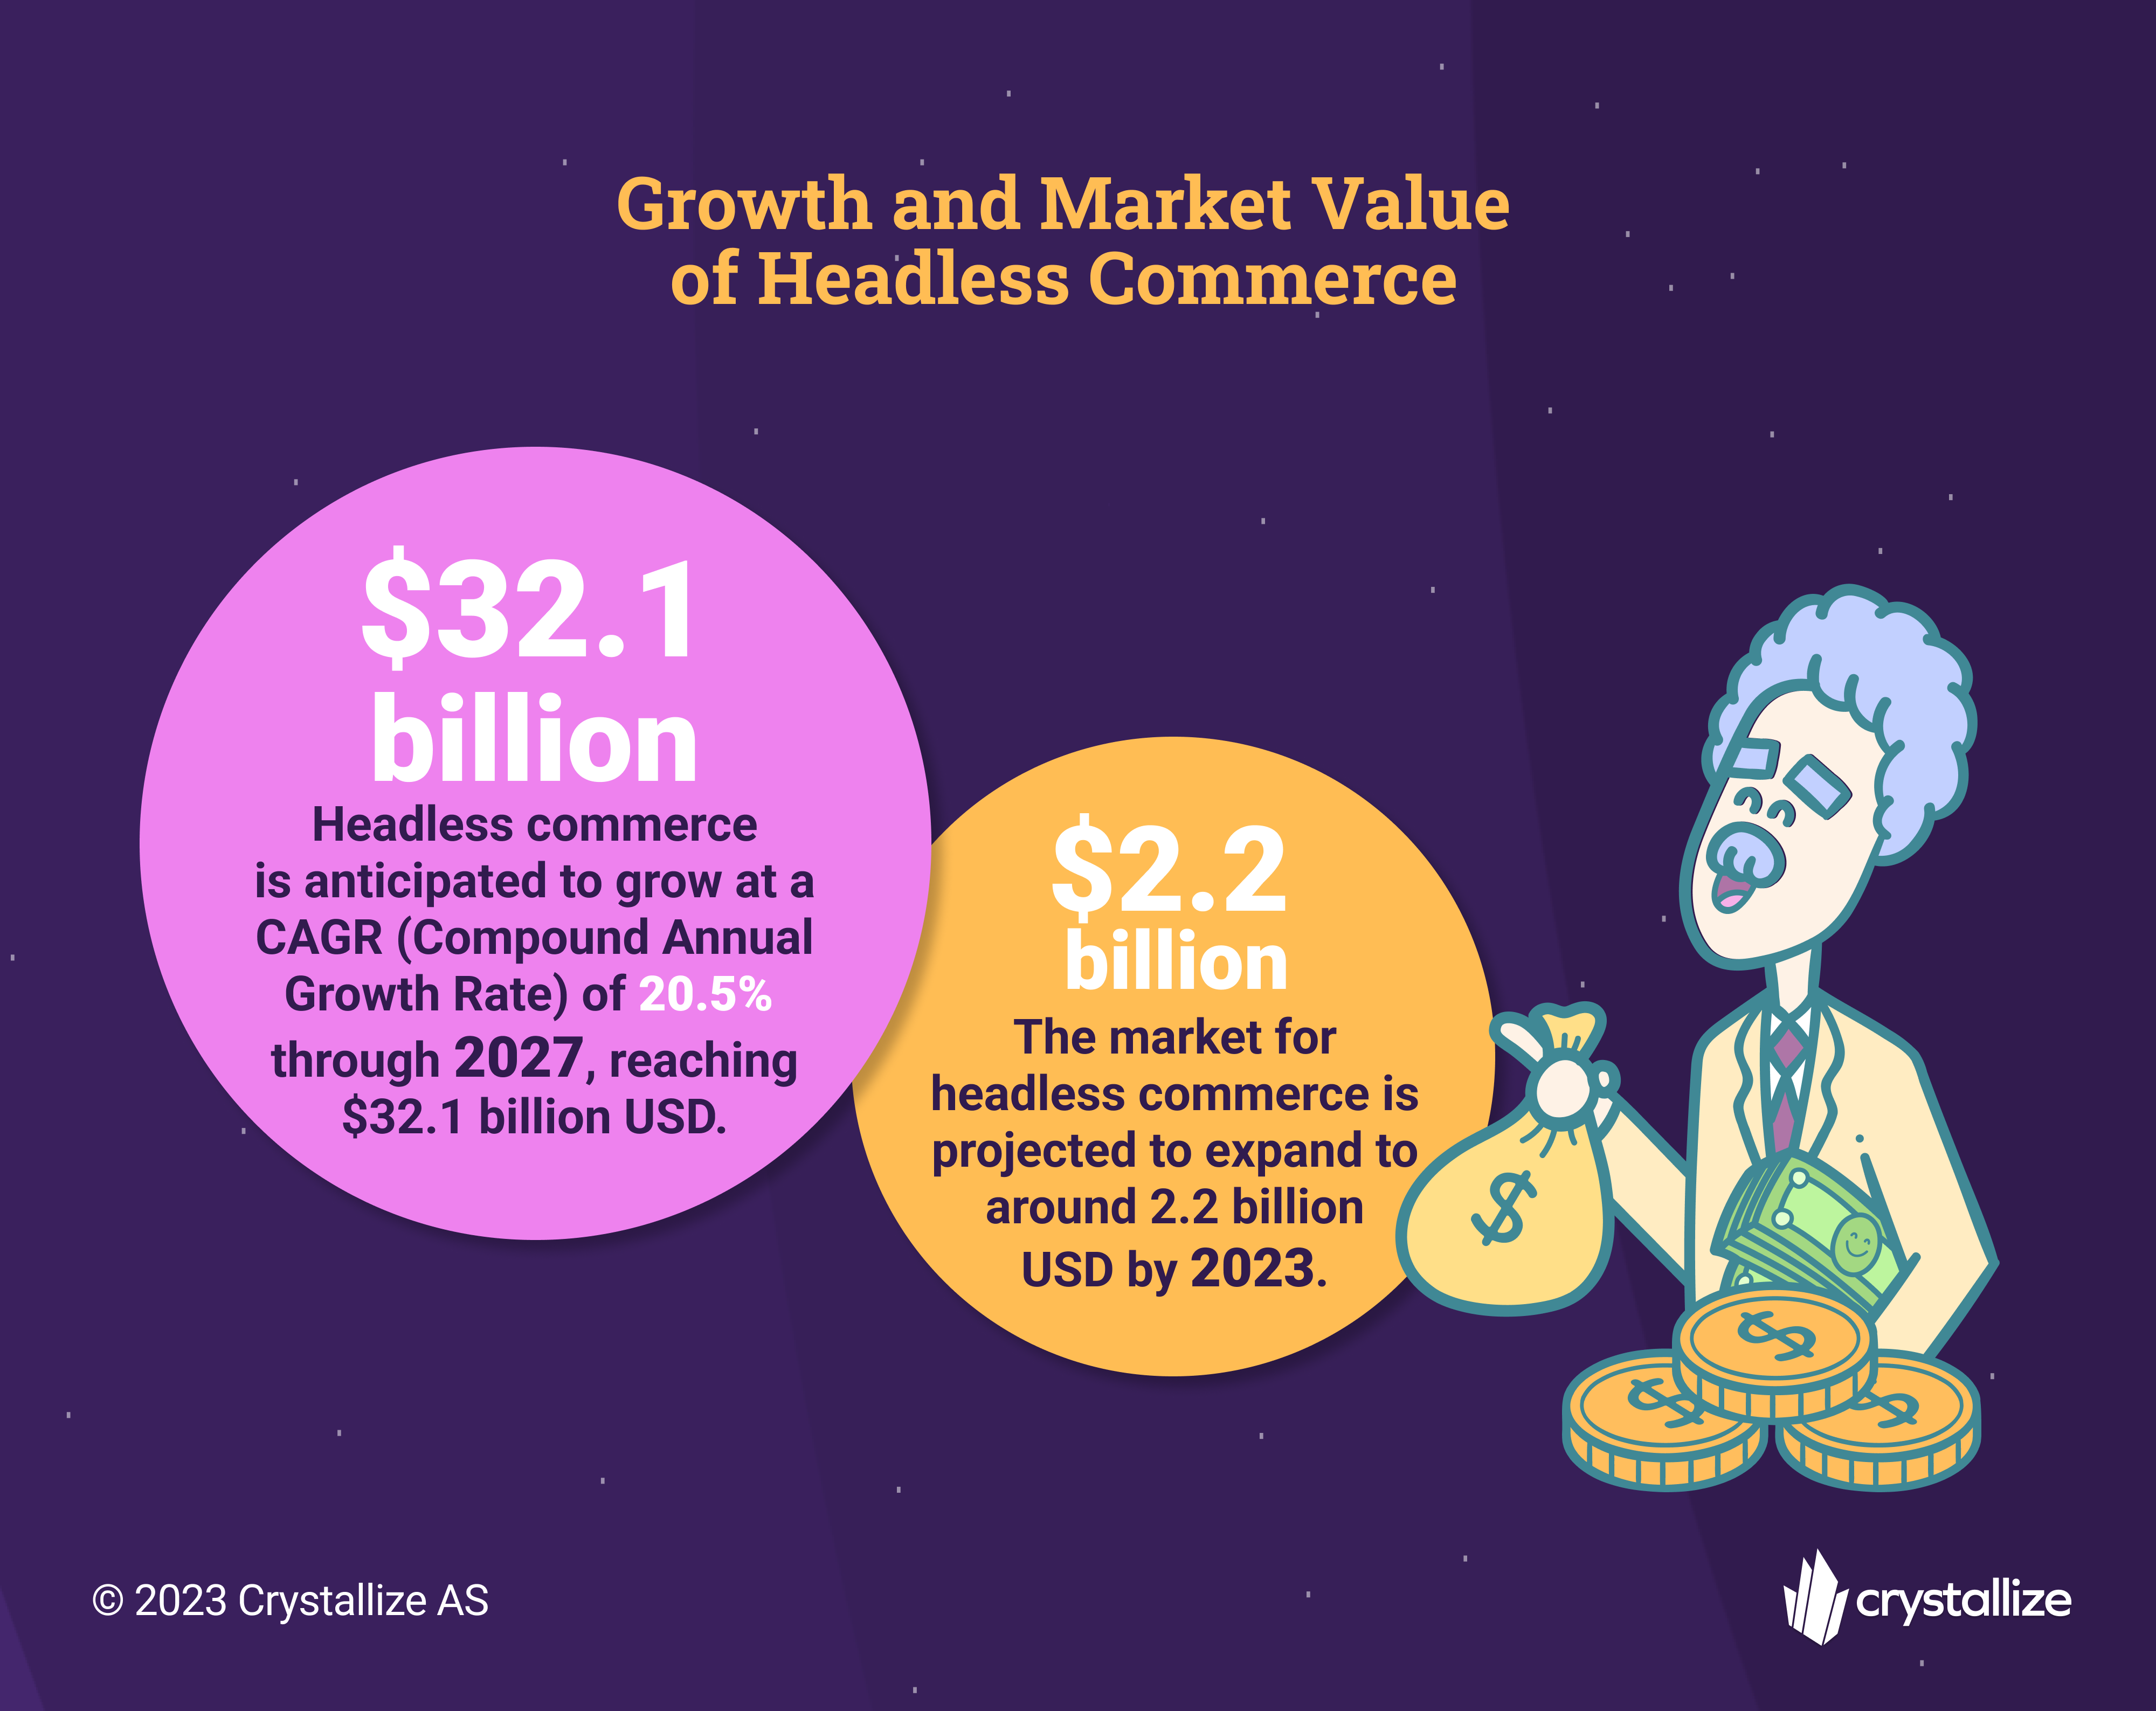 Growth and Market Value of Headless Commerce